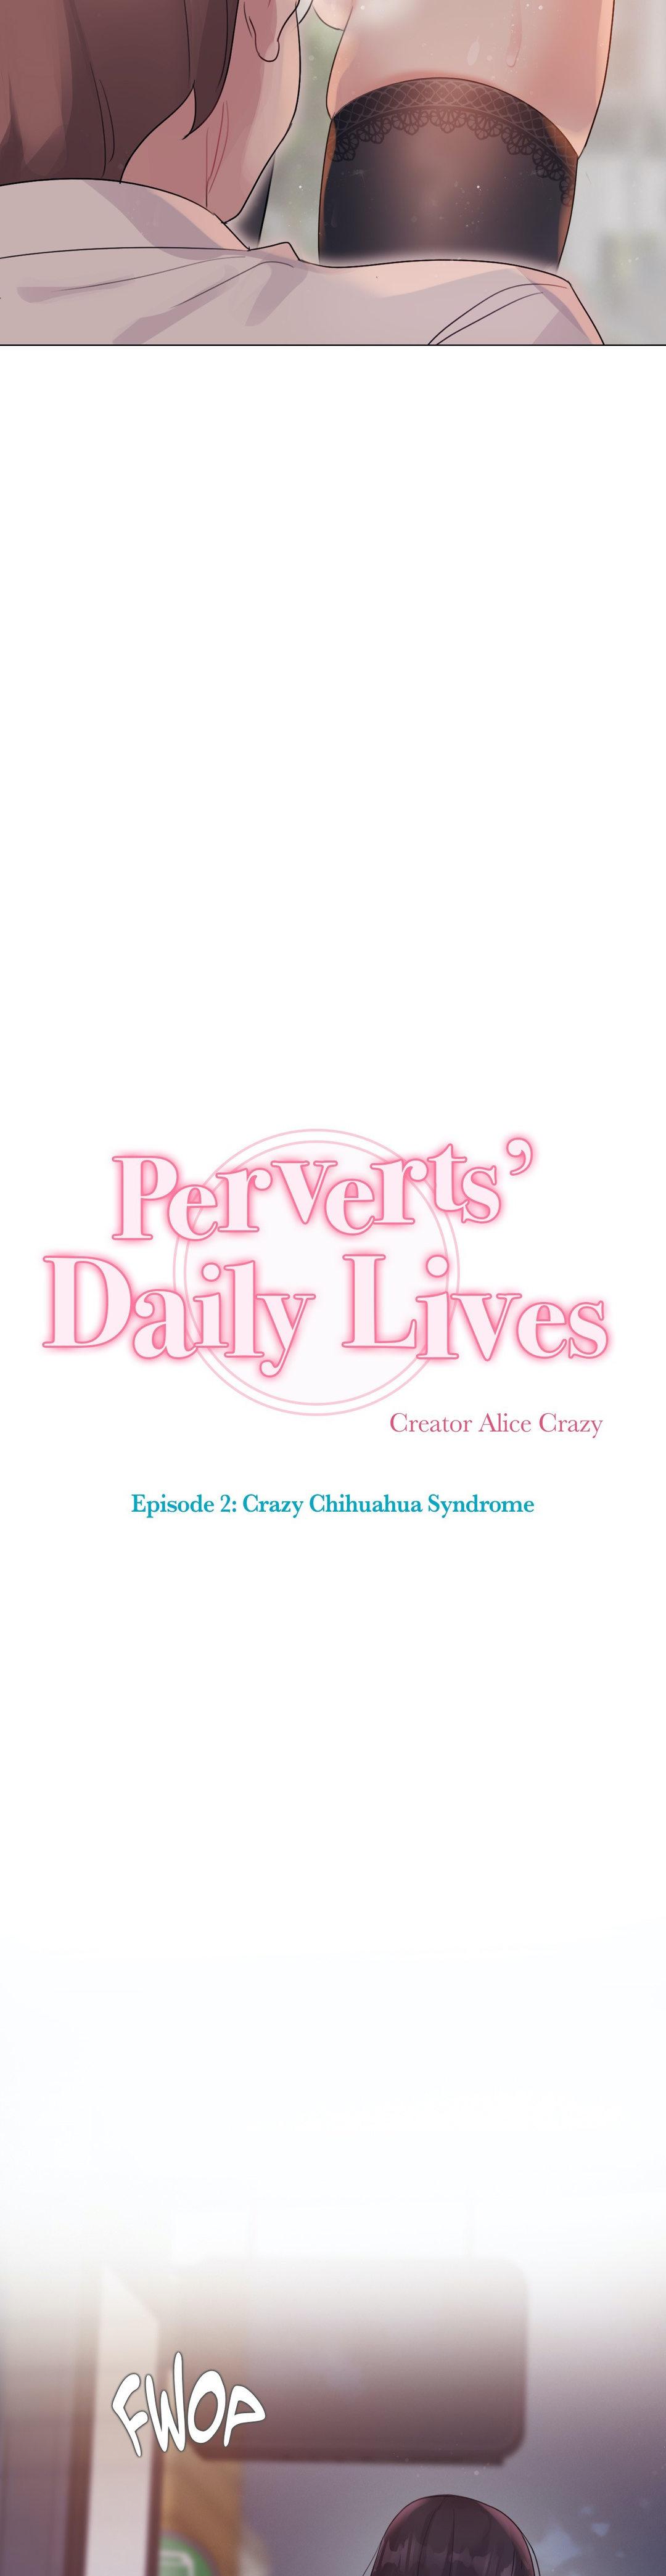 Perverts' Daily Lives Episode 2: Crazy Chihuahua Syndrome 399